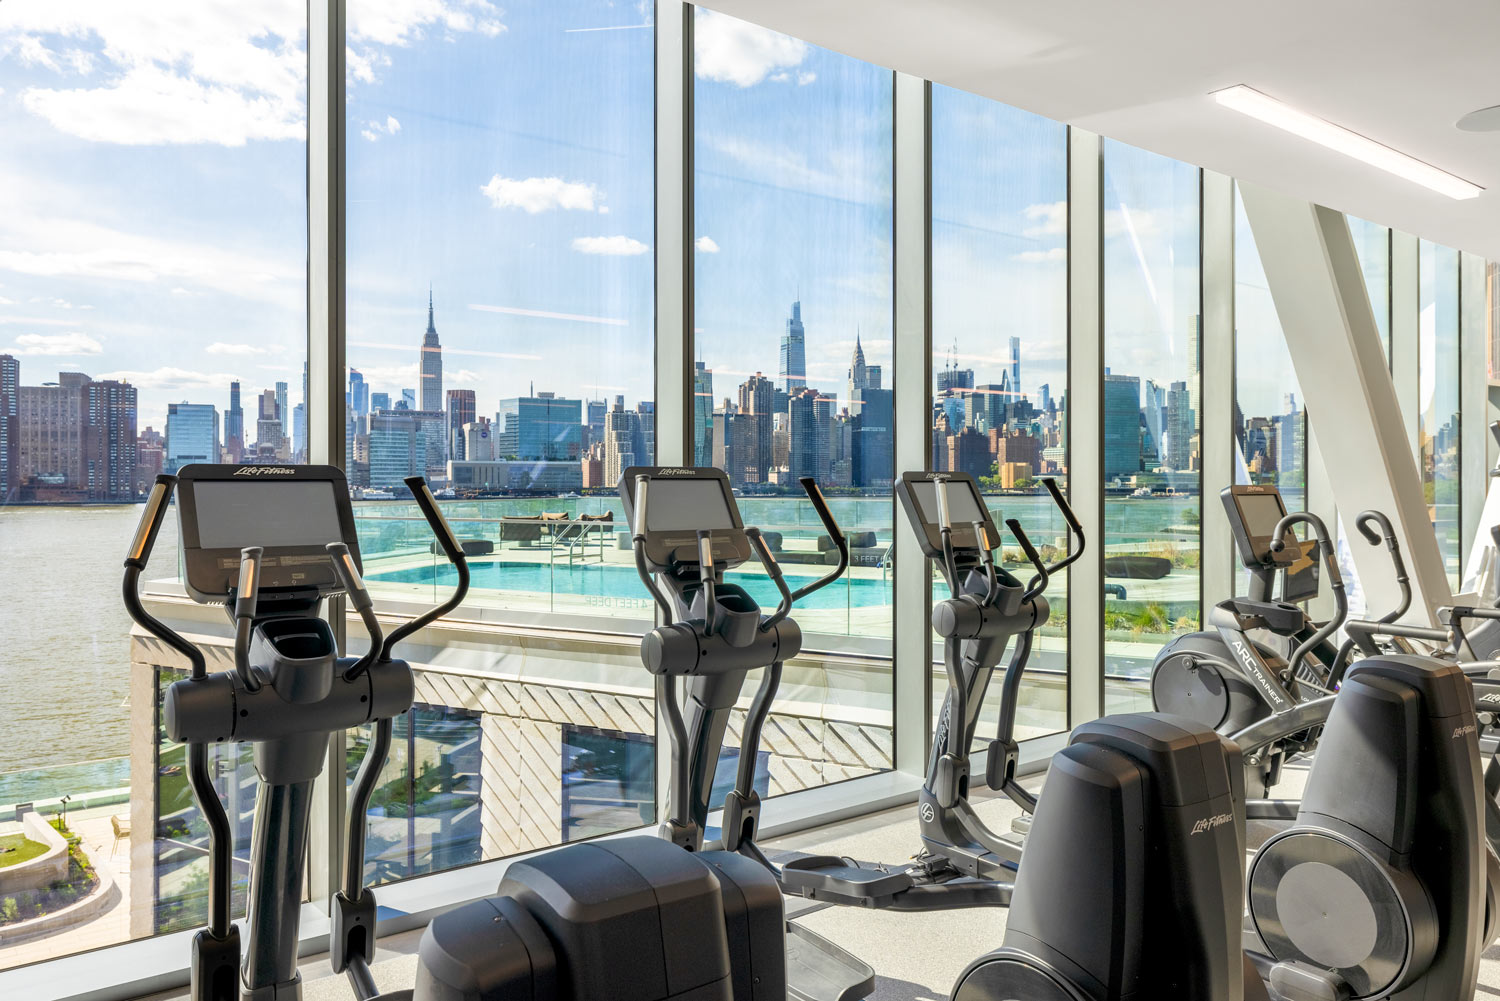 Bridging the two towers is a state-of-the-art fitness center